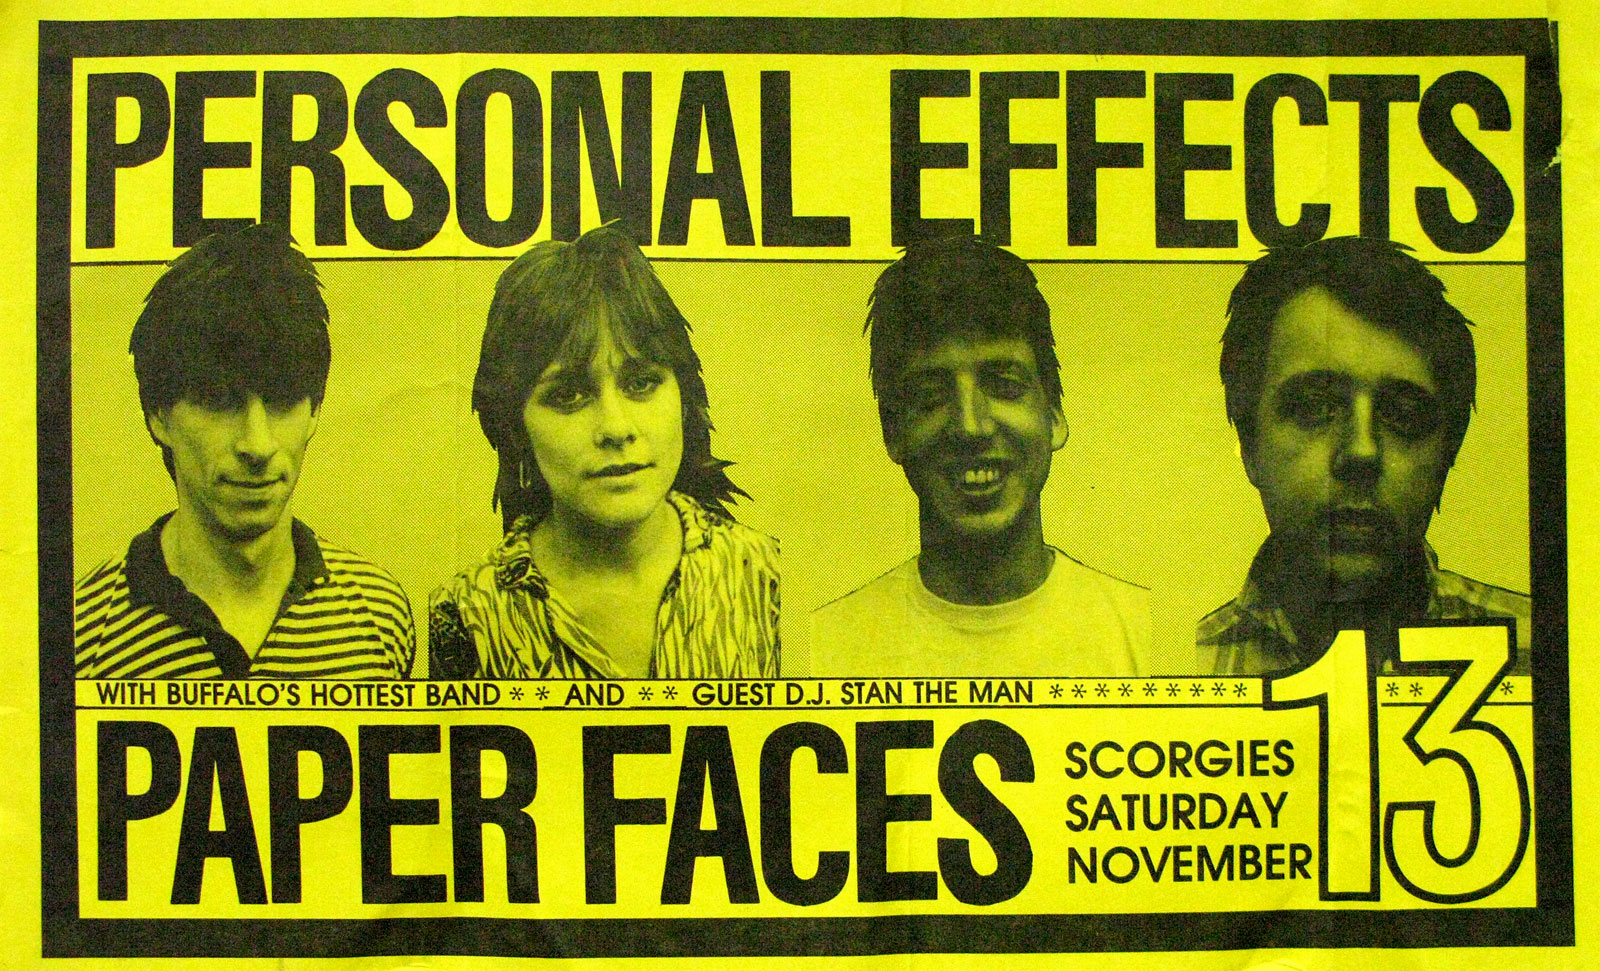 Poster for Personal Effects with Paper Faces at Scorgie's in Rochester, New York on Saturday 11.13.1982